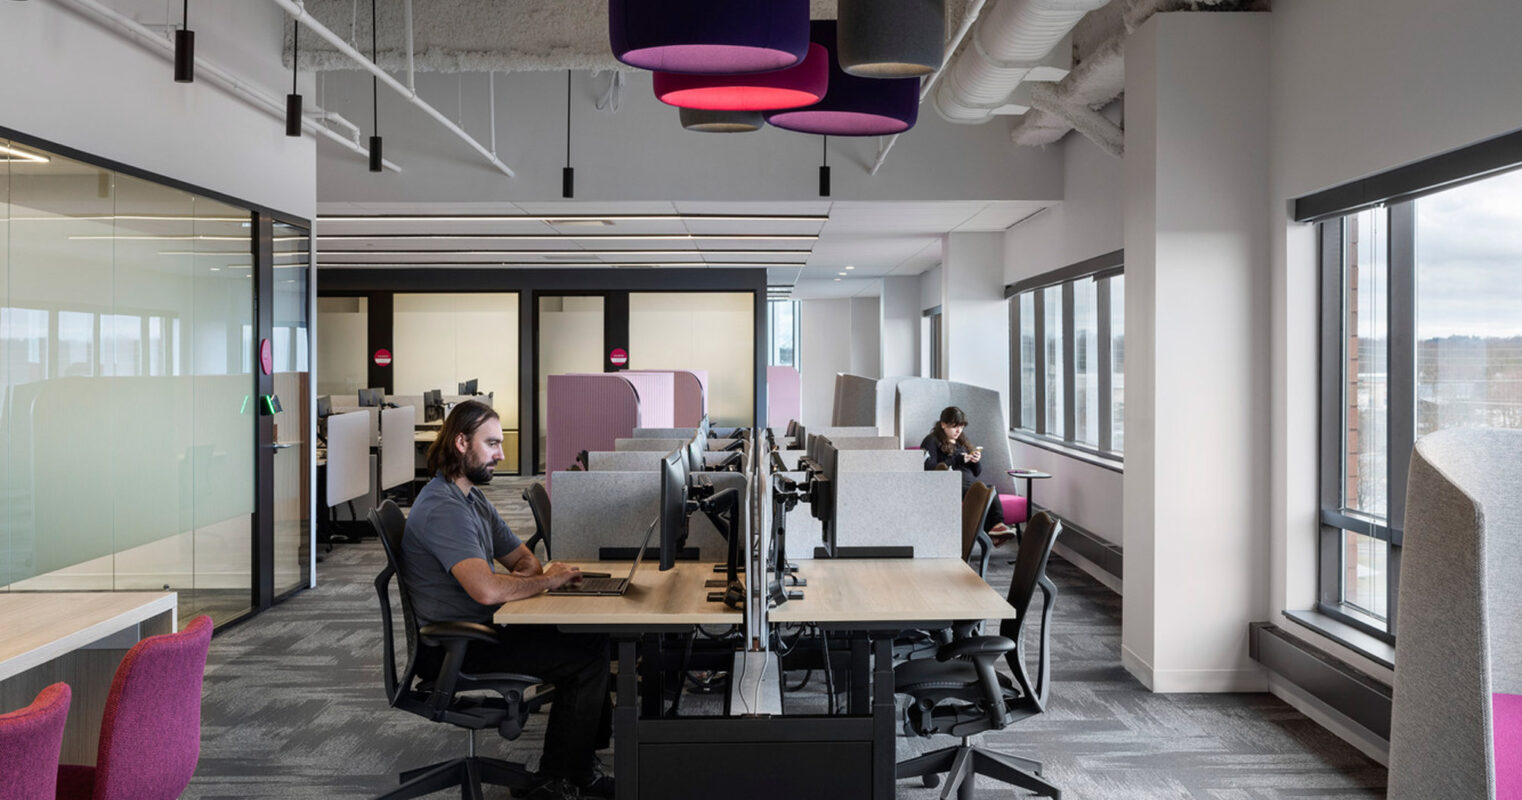 Modern office interior showcasing an open-plan layout with individual workstations, ergonomic chairs, and vibrant fuchsia accents from overhead lighting fixtures and seating. Clear glass partitions maintain openness, while exposed ceiling ducts add an industrial touch juxtaposed with the carpeted floors for a contemporary workspace design.